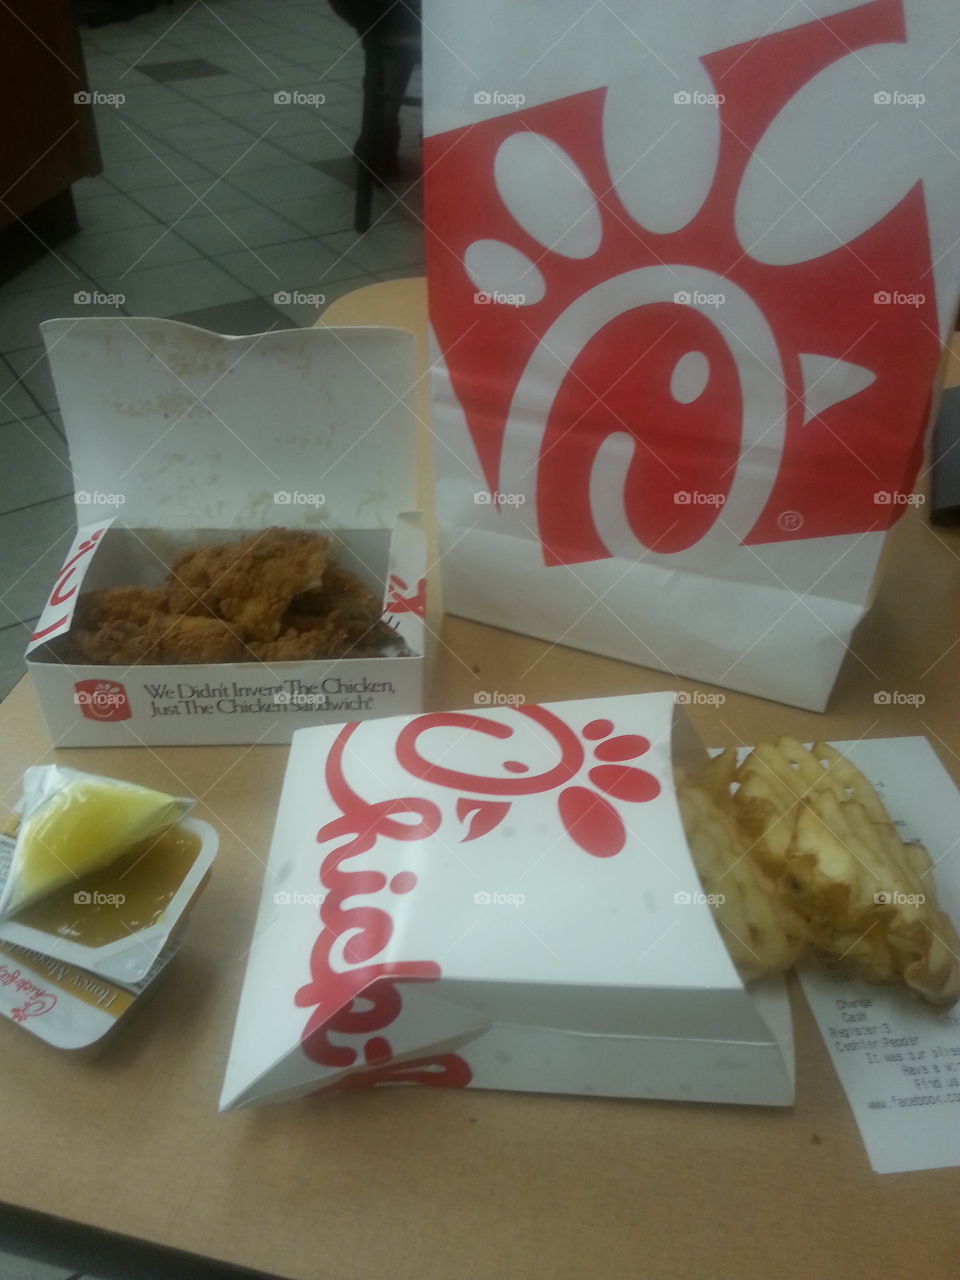 chick fil a. at the mall